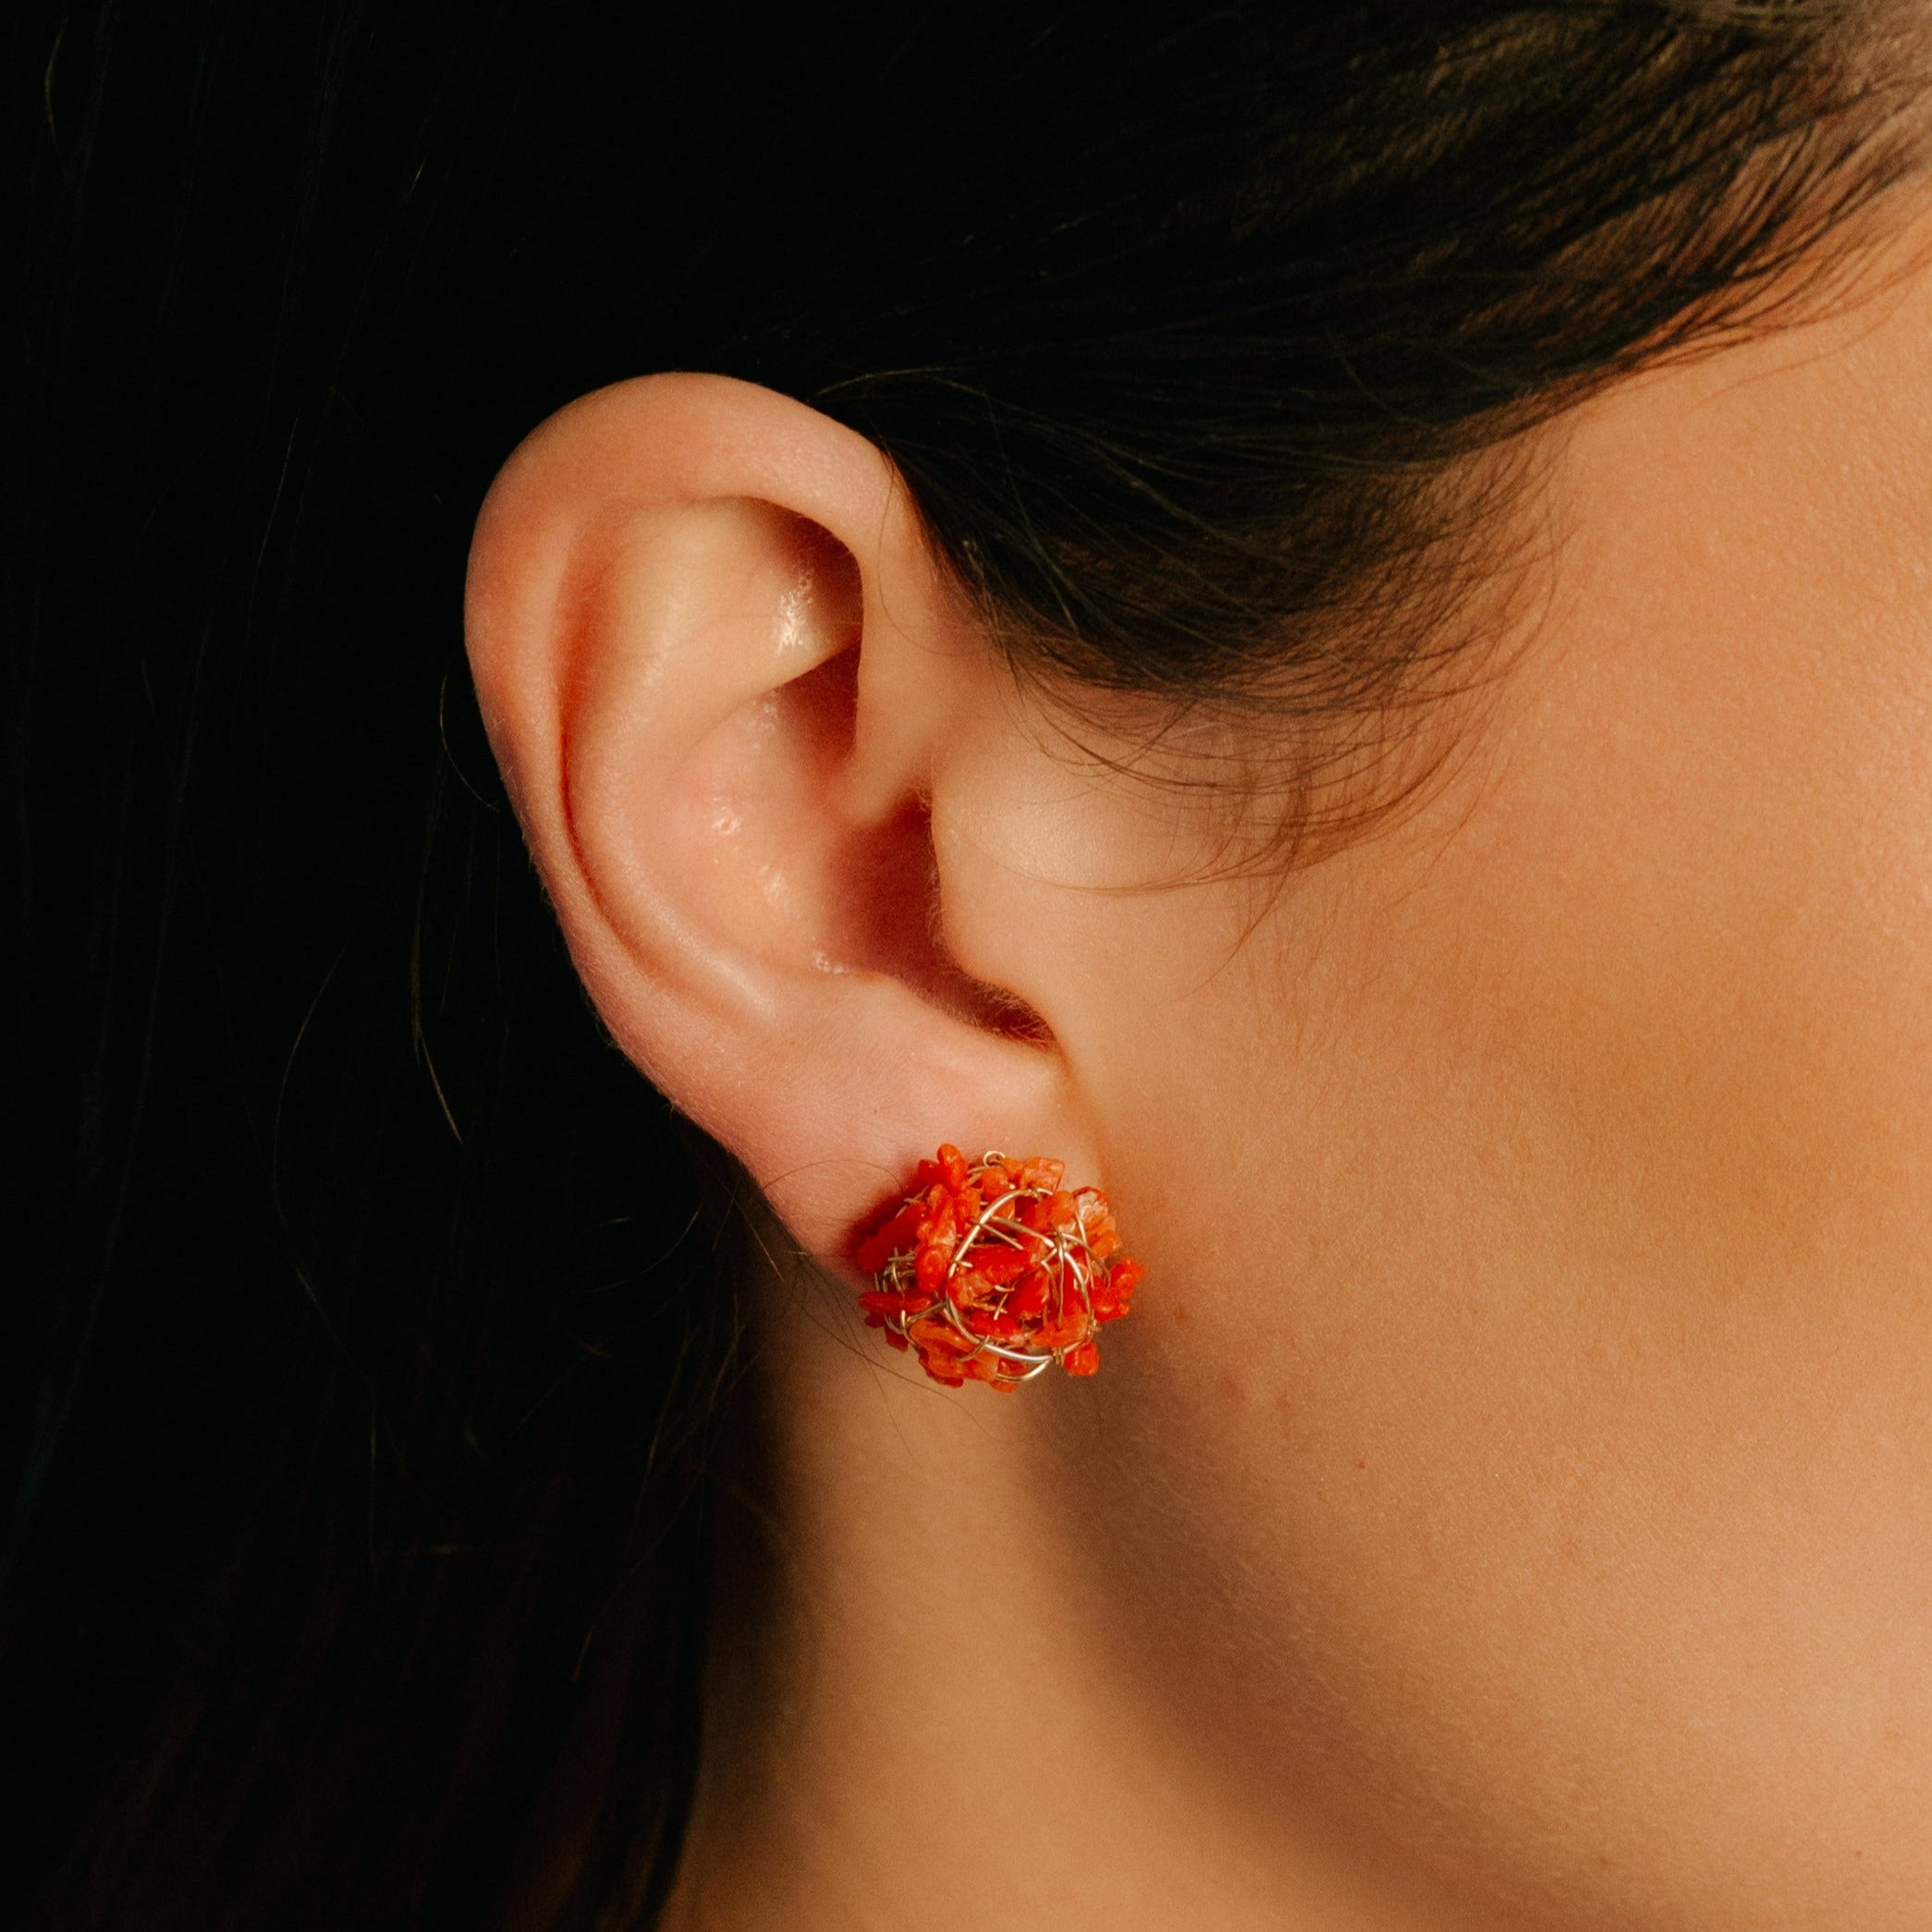 Clementina Stud Earrings #1 (12mm) - Red Coral & Yellow Gold Earrings TARBAY   